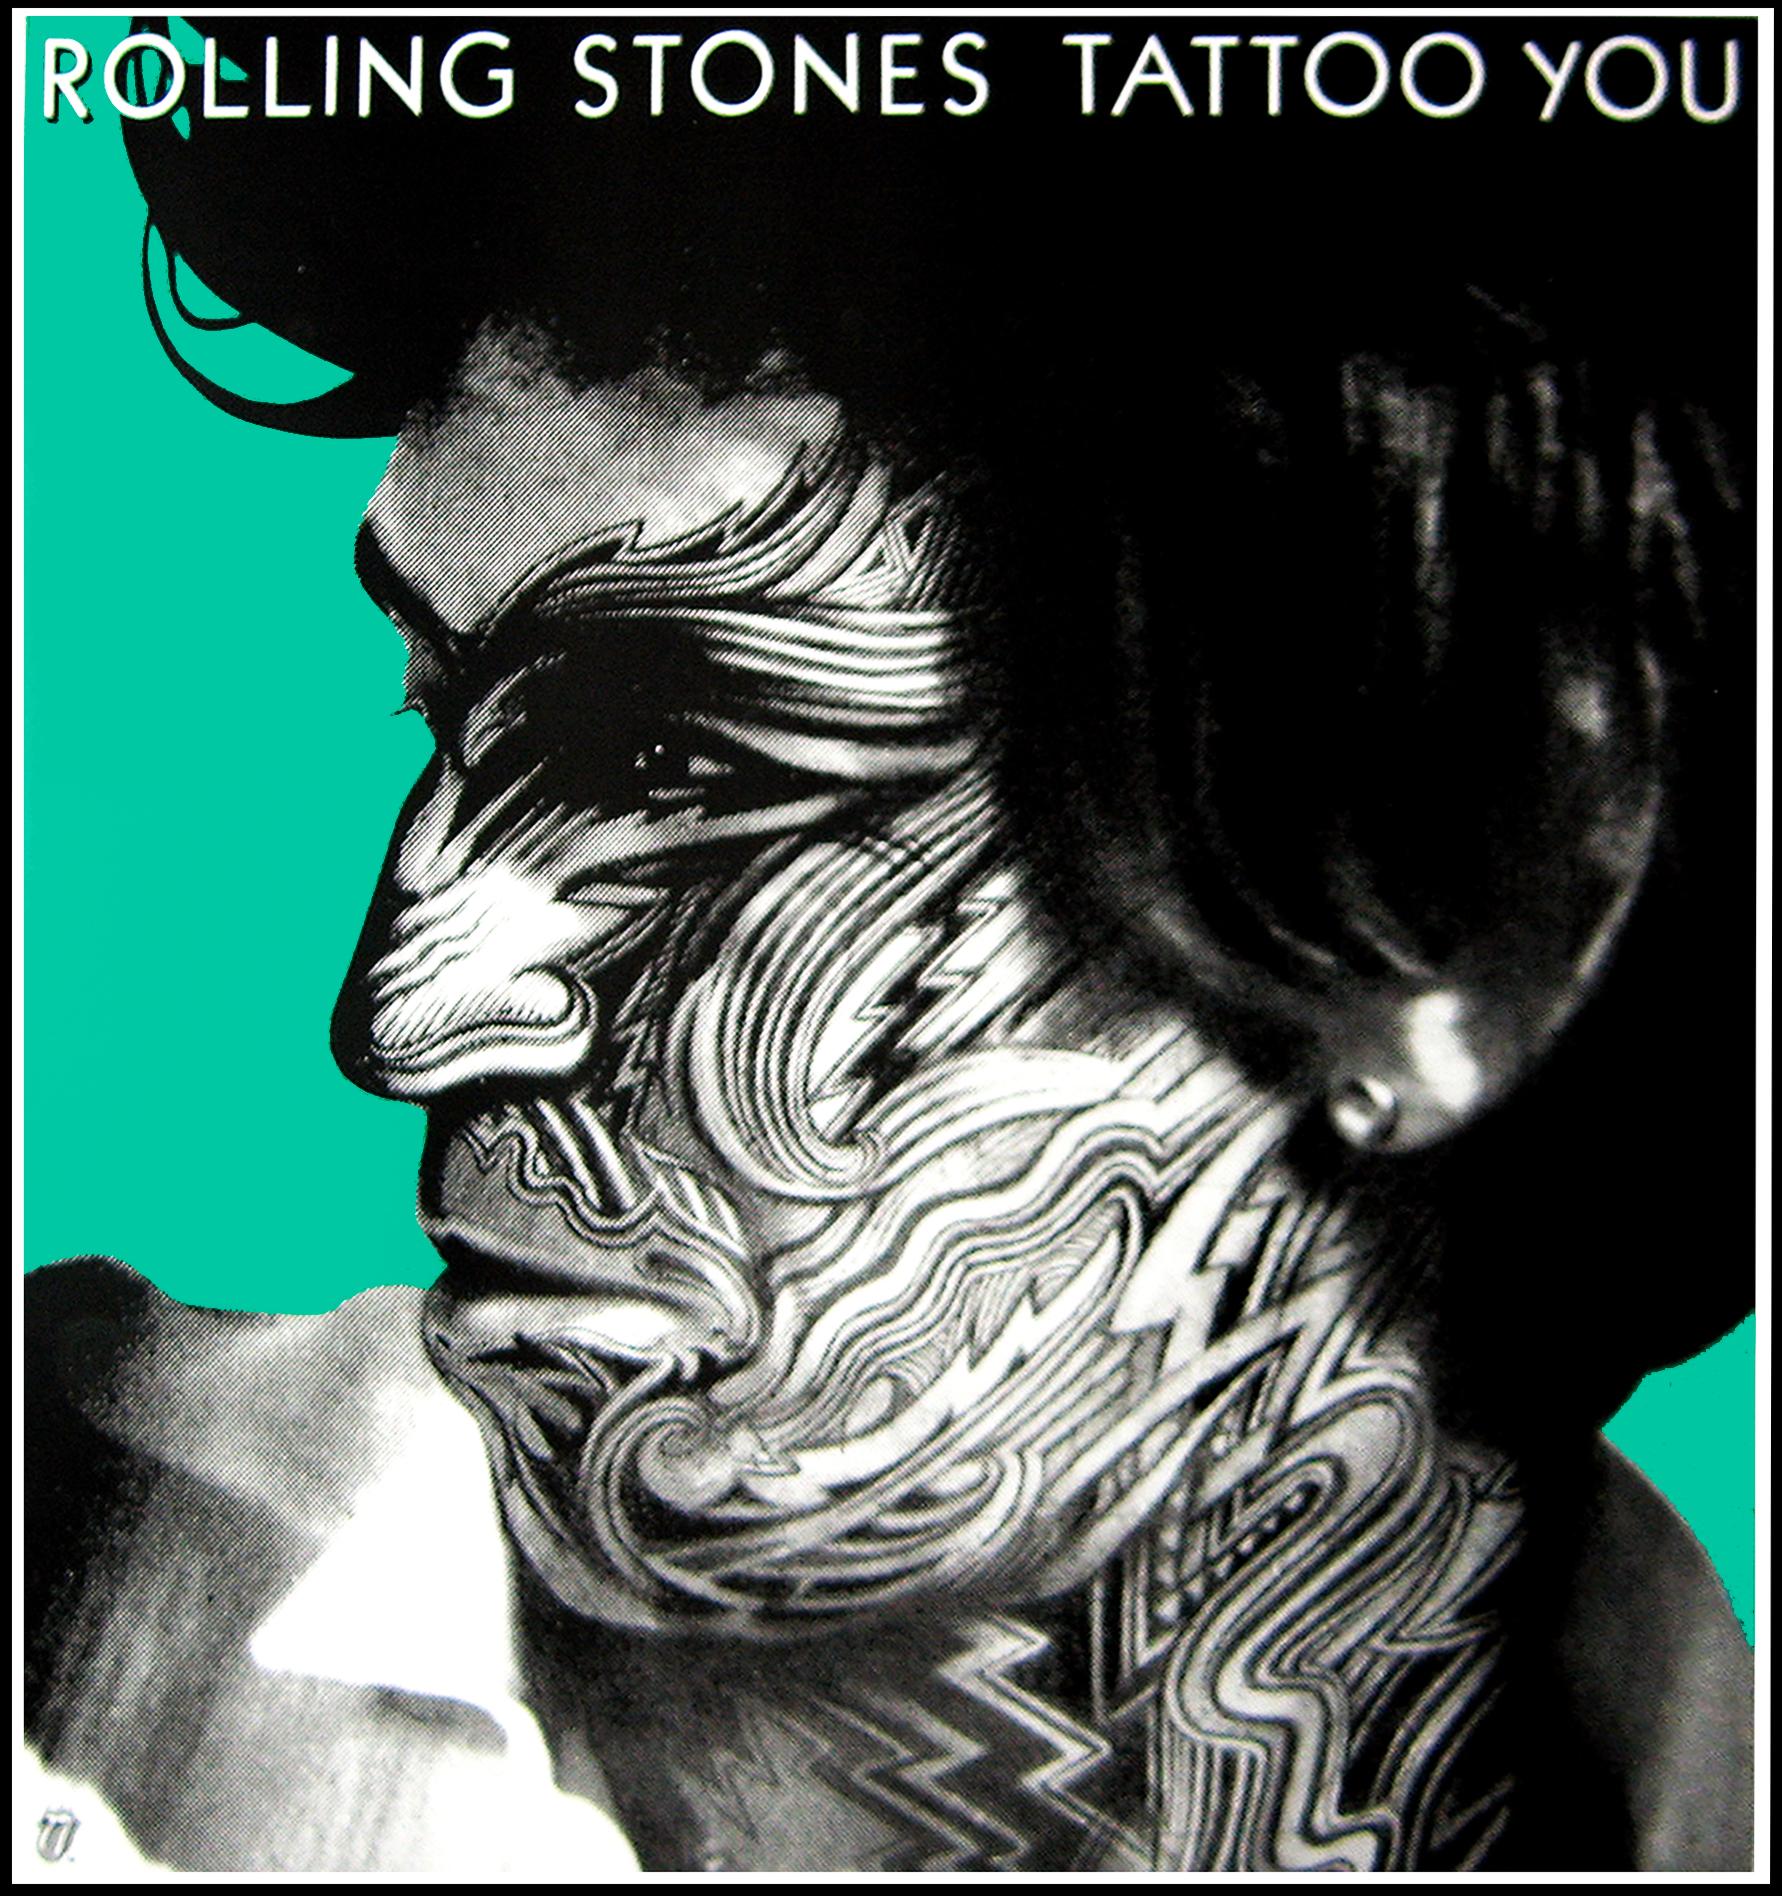 rolling stones tattoo you by 82percentevil on DeviantArt  Rolling stones  tattoo Stone tattoo Rolling stones logo